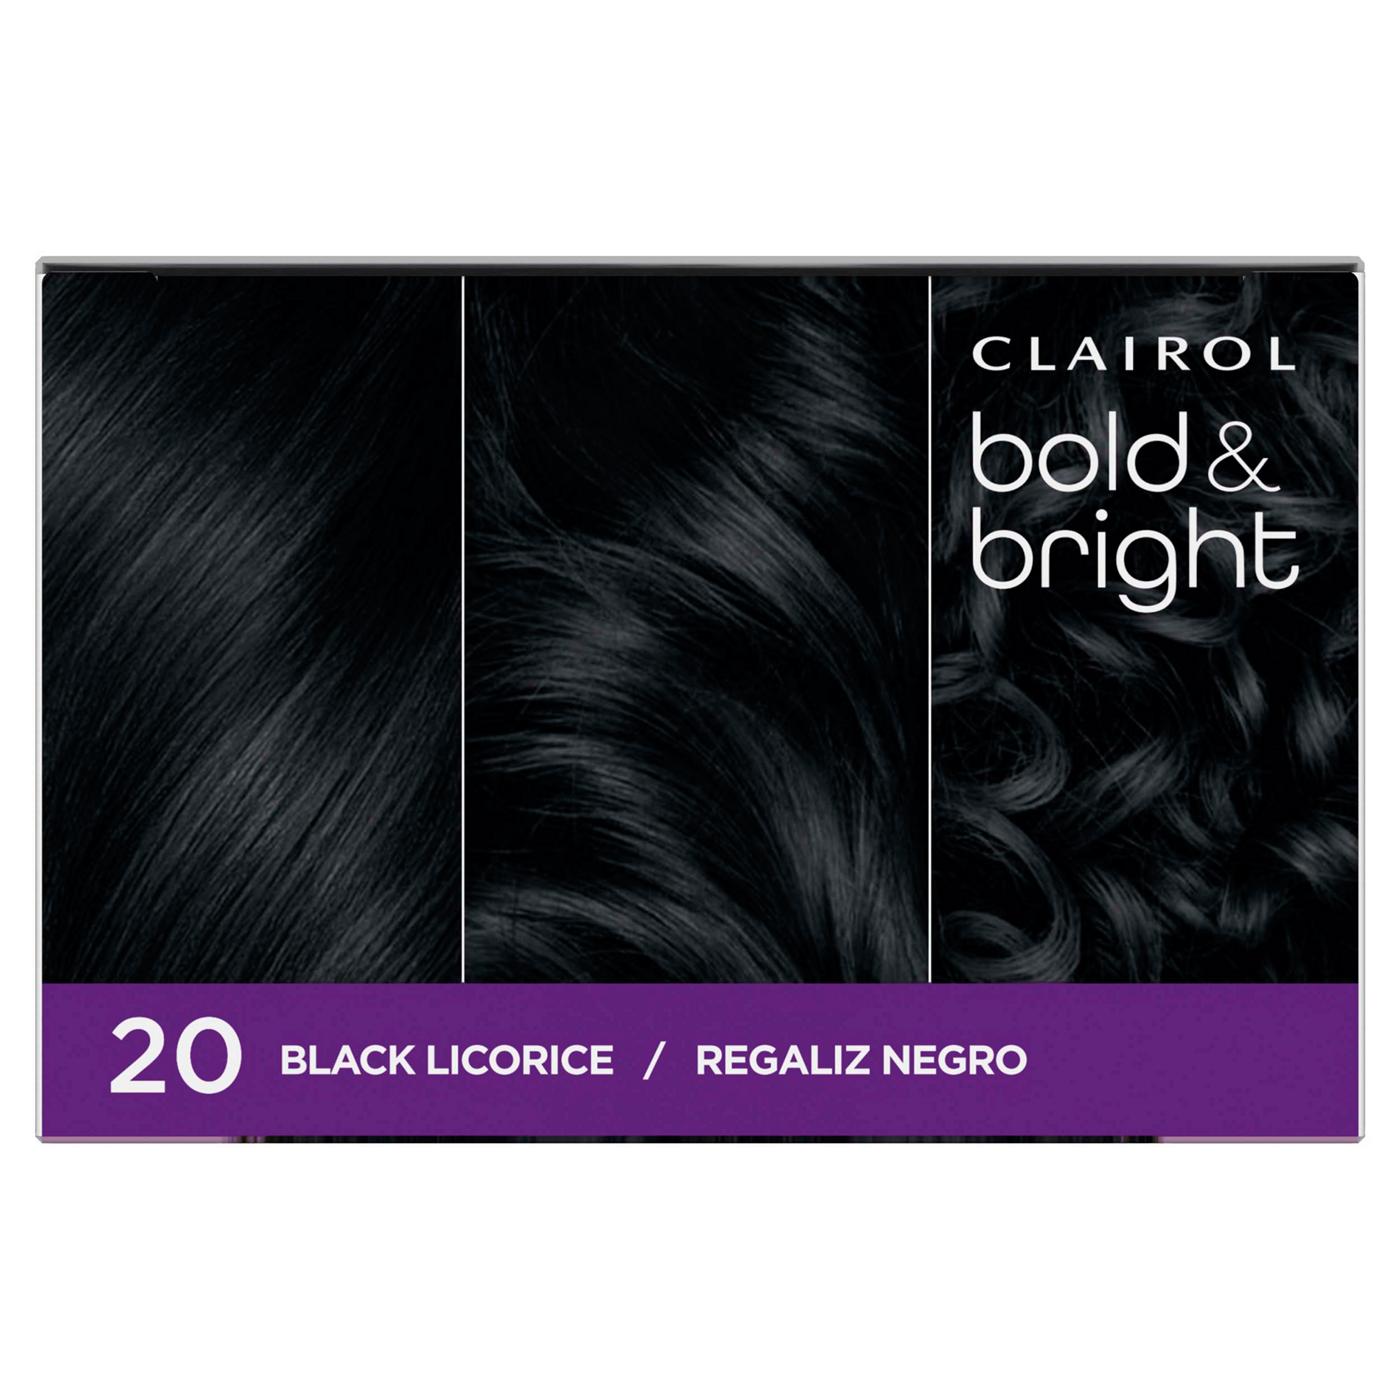 Clairol Bold & Bright Permanent Hair Color - 20 Black Licorice; image 6 of 11